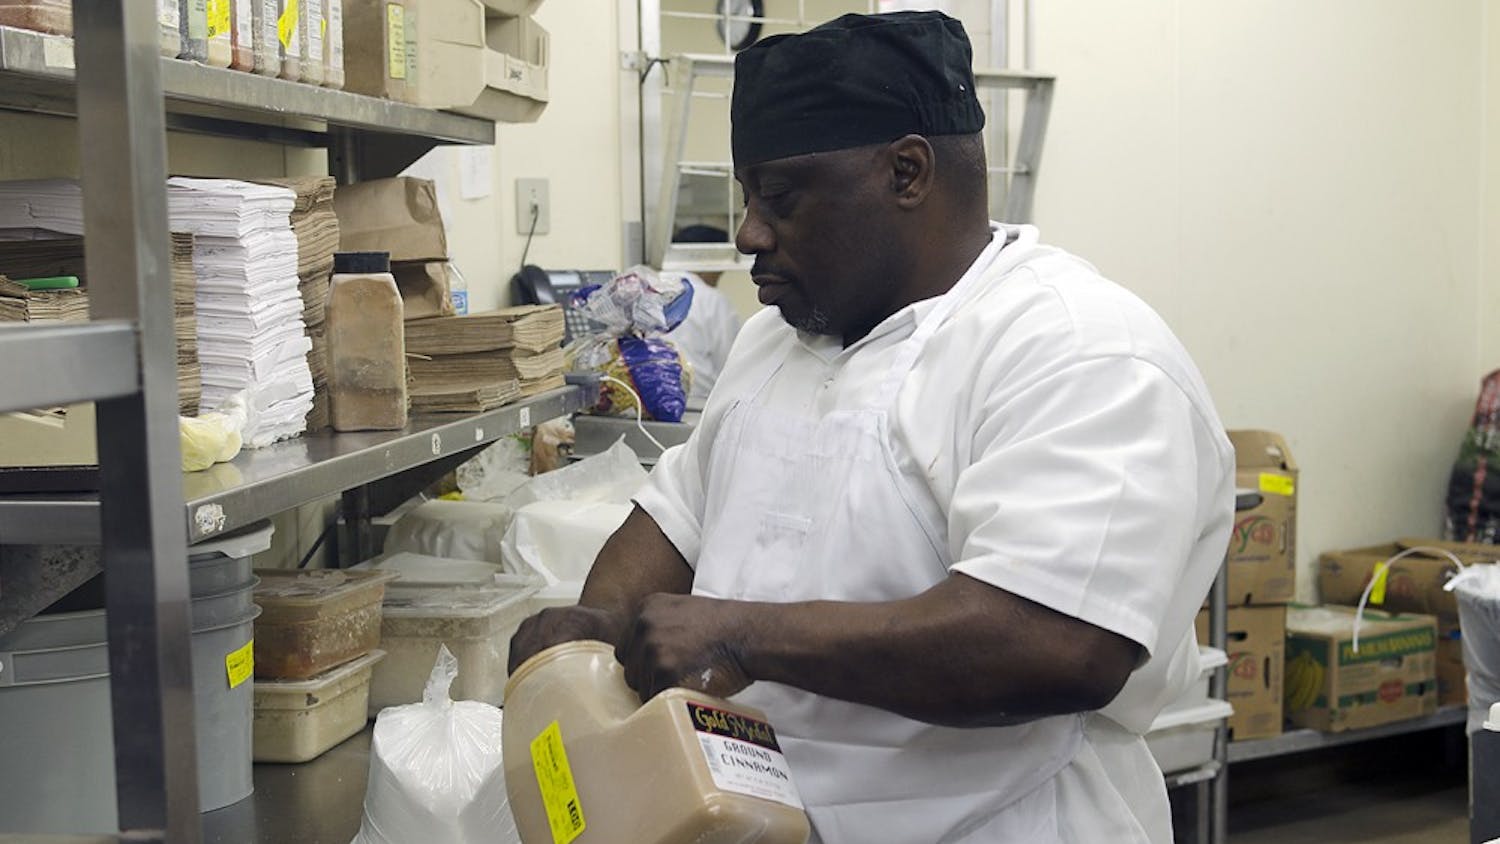 After being released from prison, Jimmy “Moe” Penny was hired at K&amp;W Cafeterias. He started his job there while he served eight years in prison.